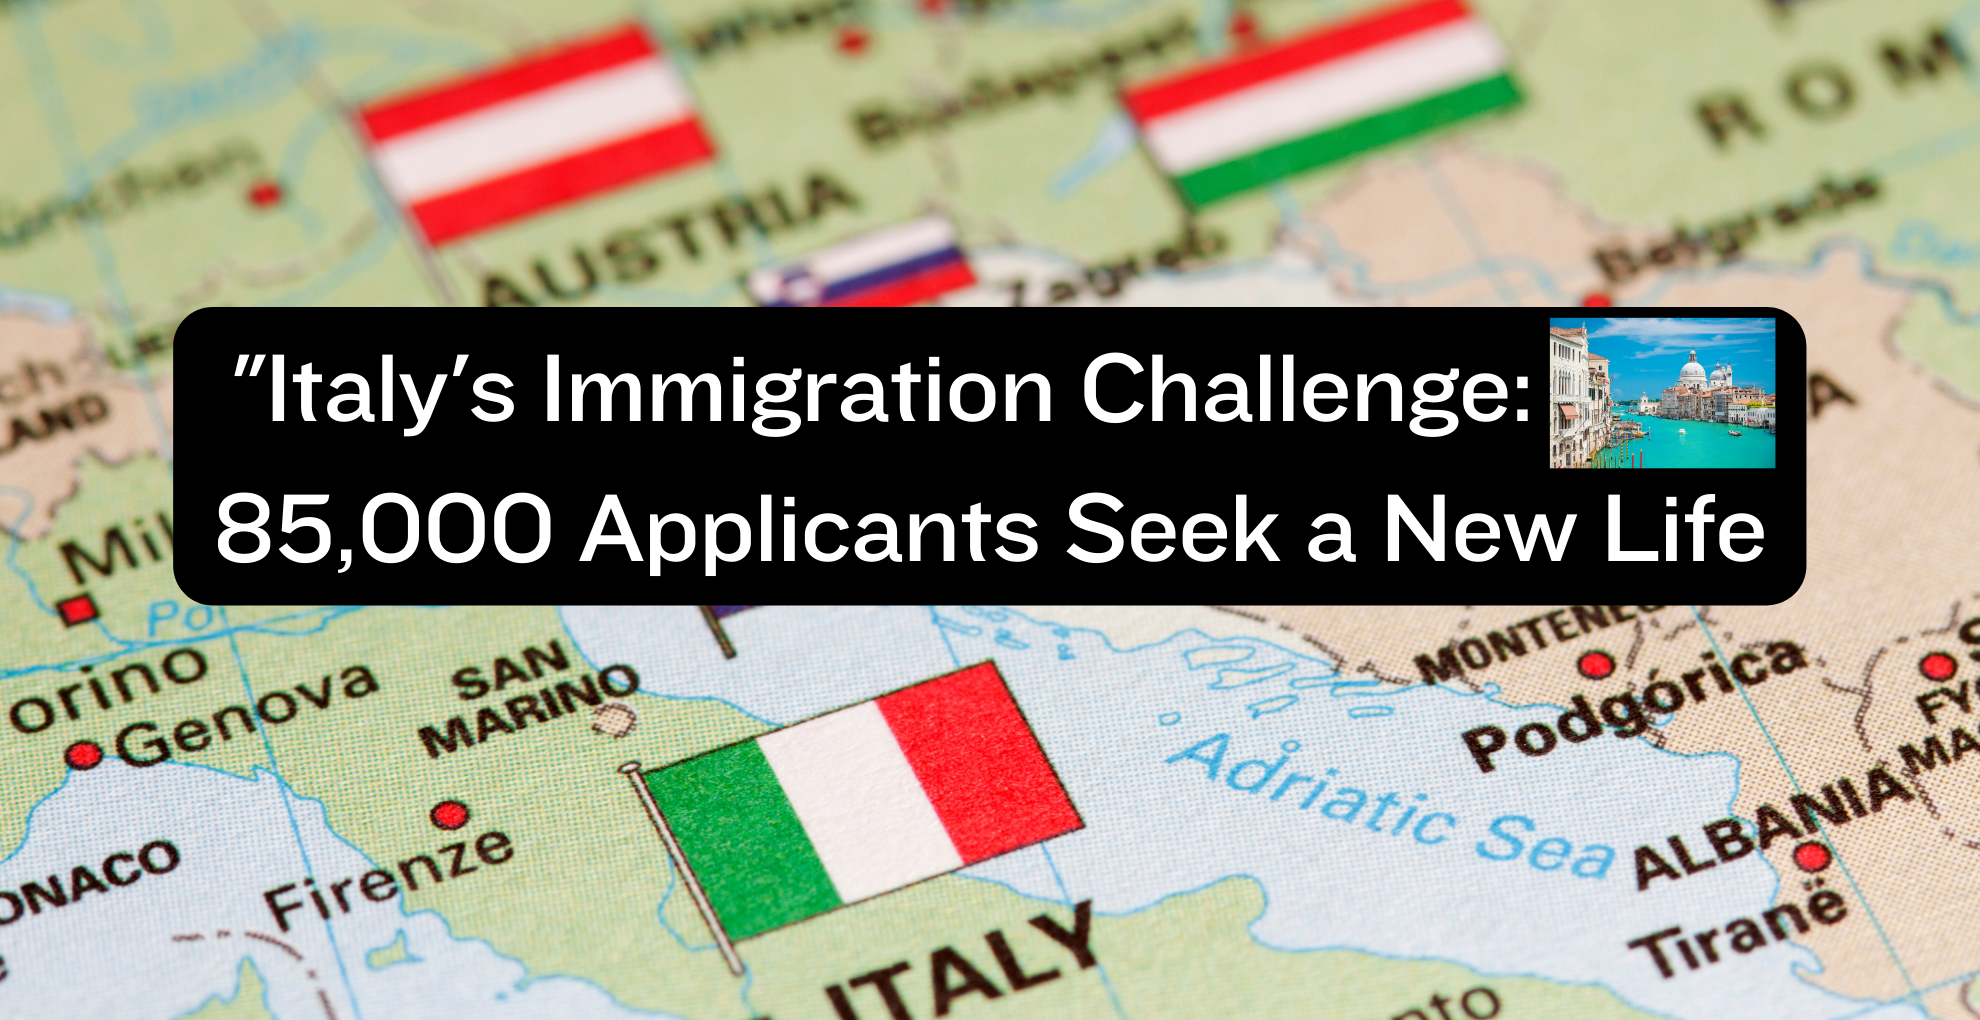 Italy's Immigration Challenge: 85,000 Applicants Seek a New Life